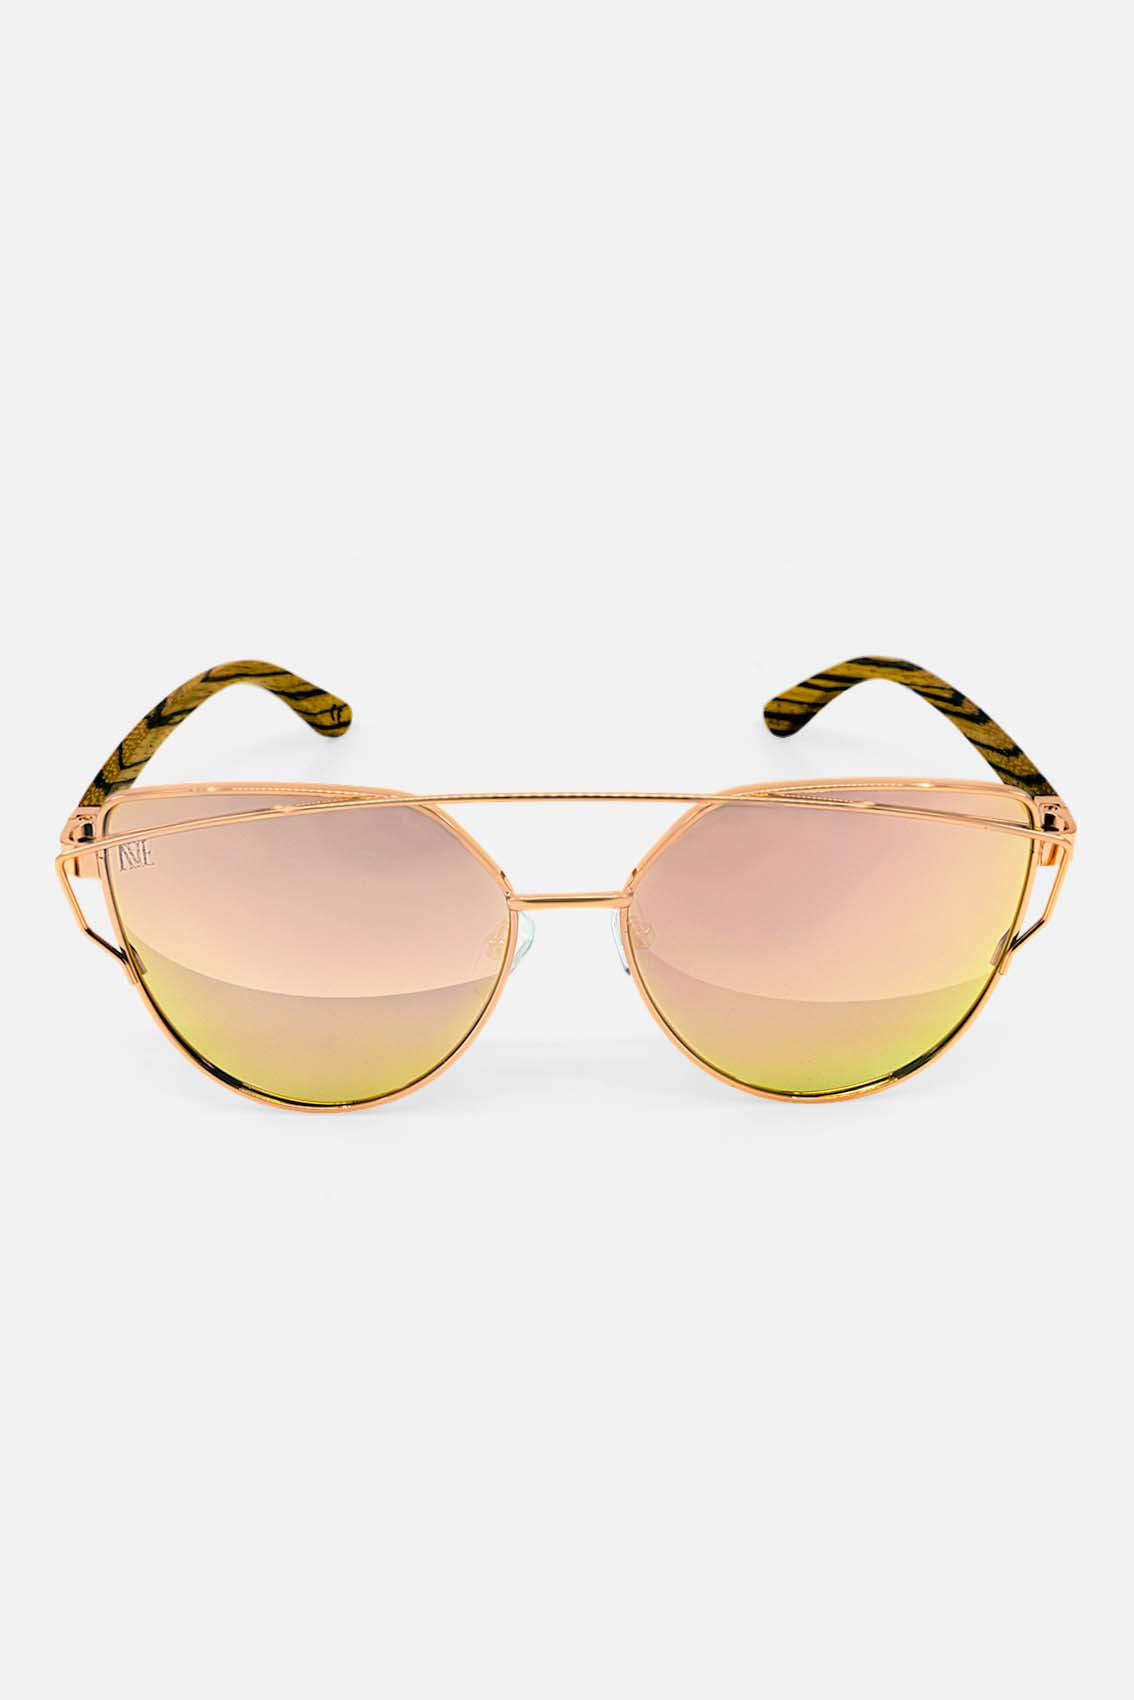 Women's sunglasses metal gold with wooden hangers and glass mirrored Edition